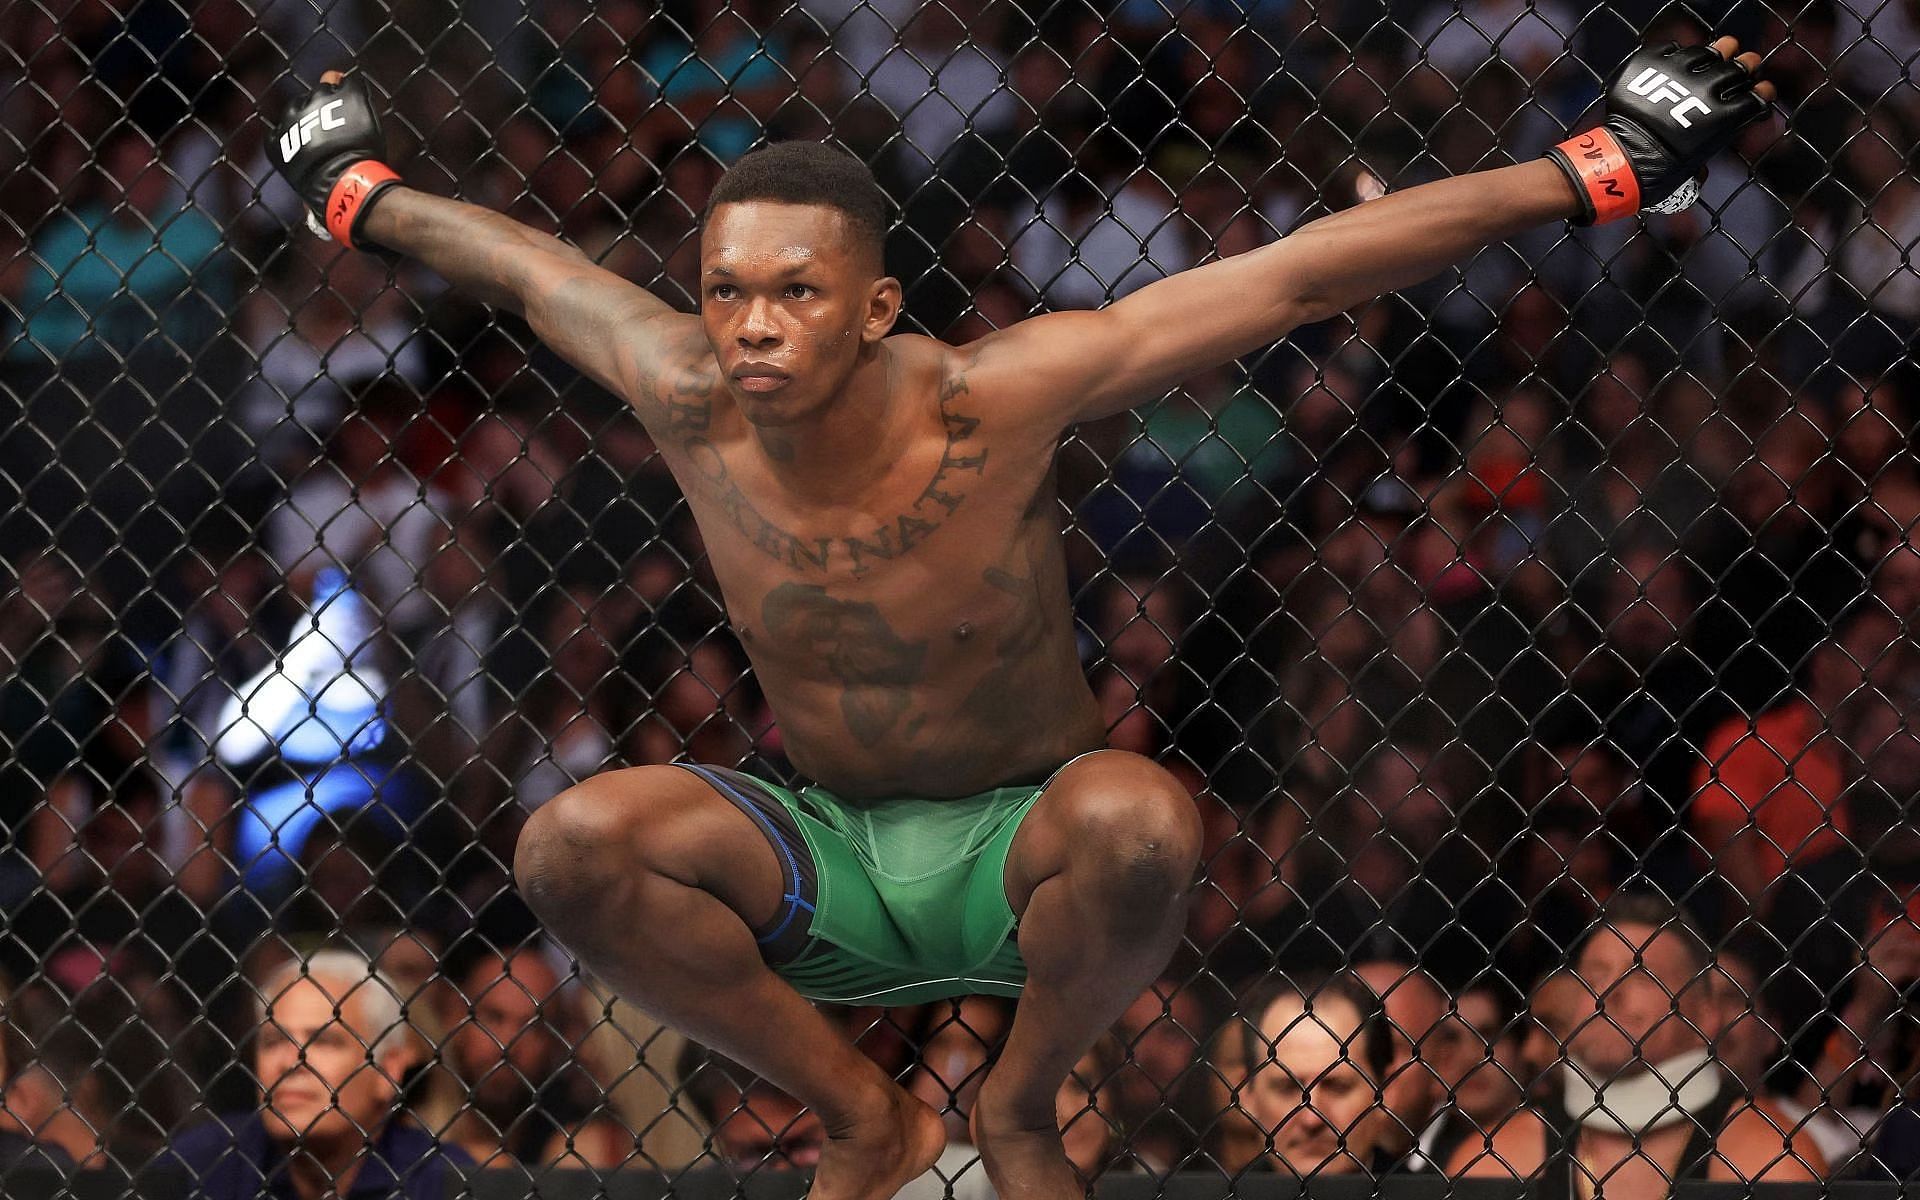 Israel Adesanya (pictured) used to train in China with UFC 299 main card fighter, says the former champ [Image Courtesy: @GettyImages]